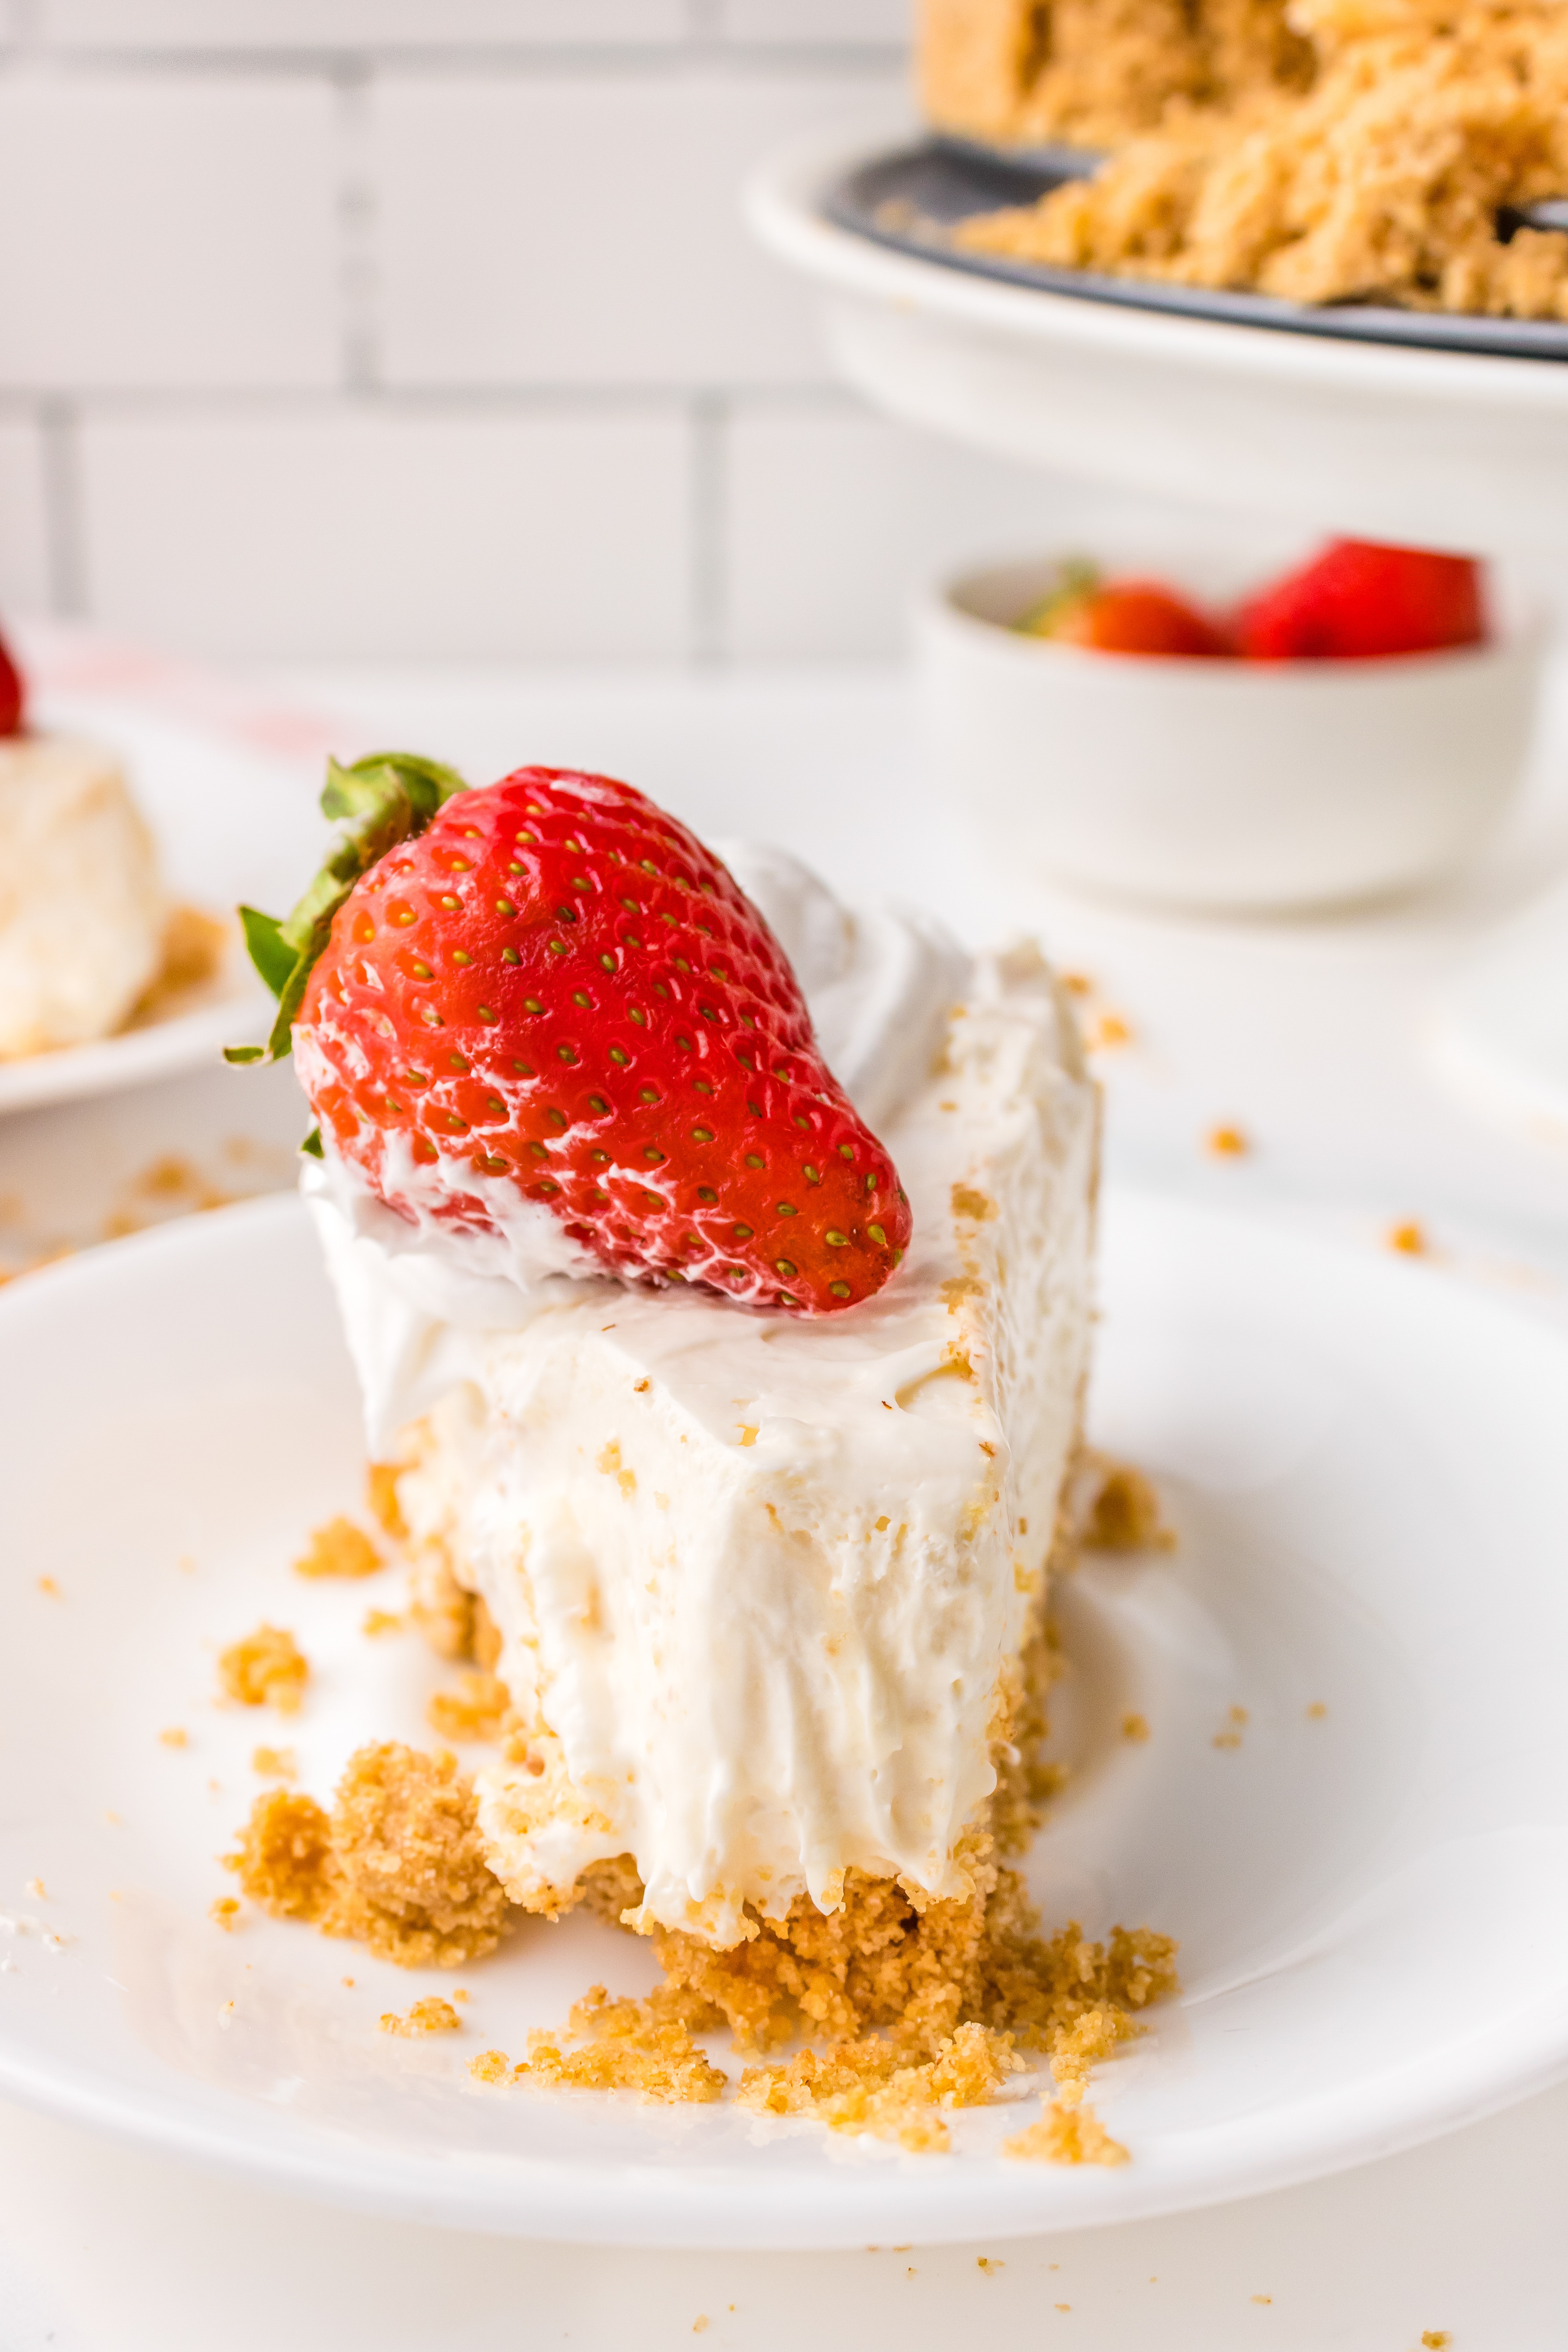 Cheesecake with graham cracker crust on a white plate.